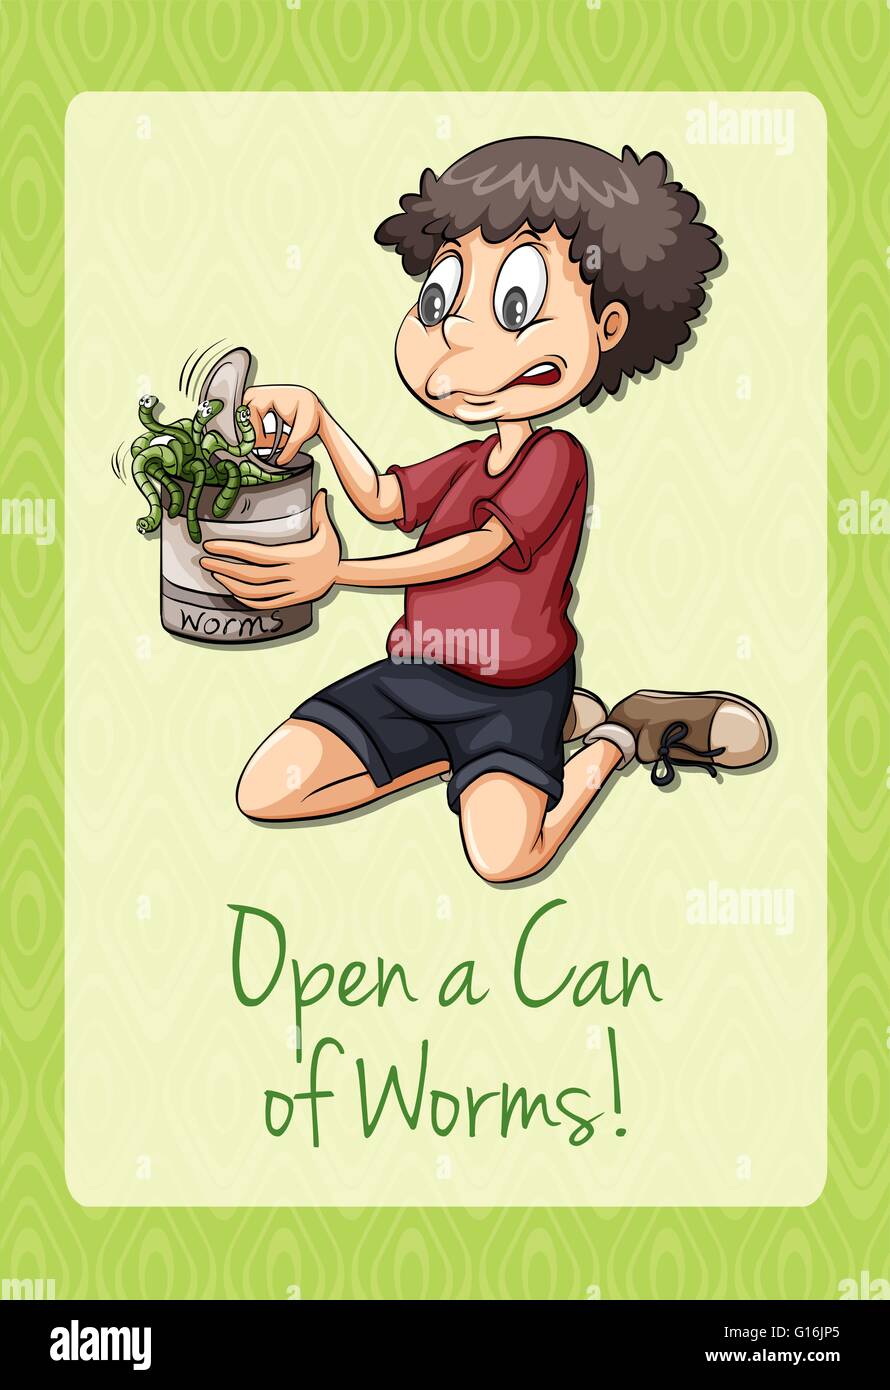 Idiom open can of worms illustration Stock Vector